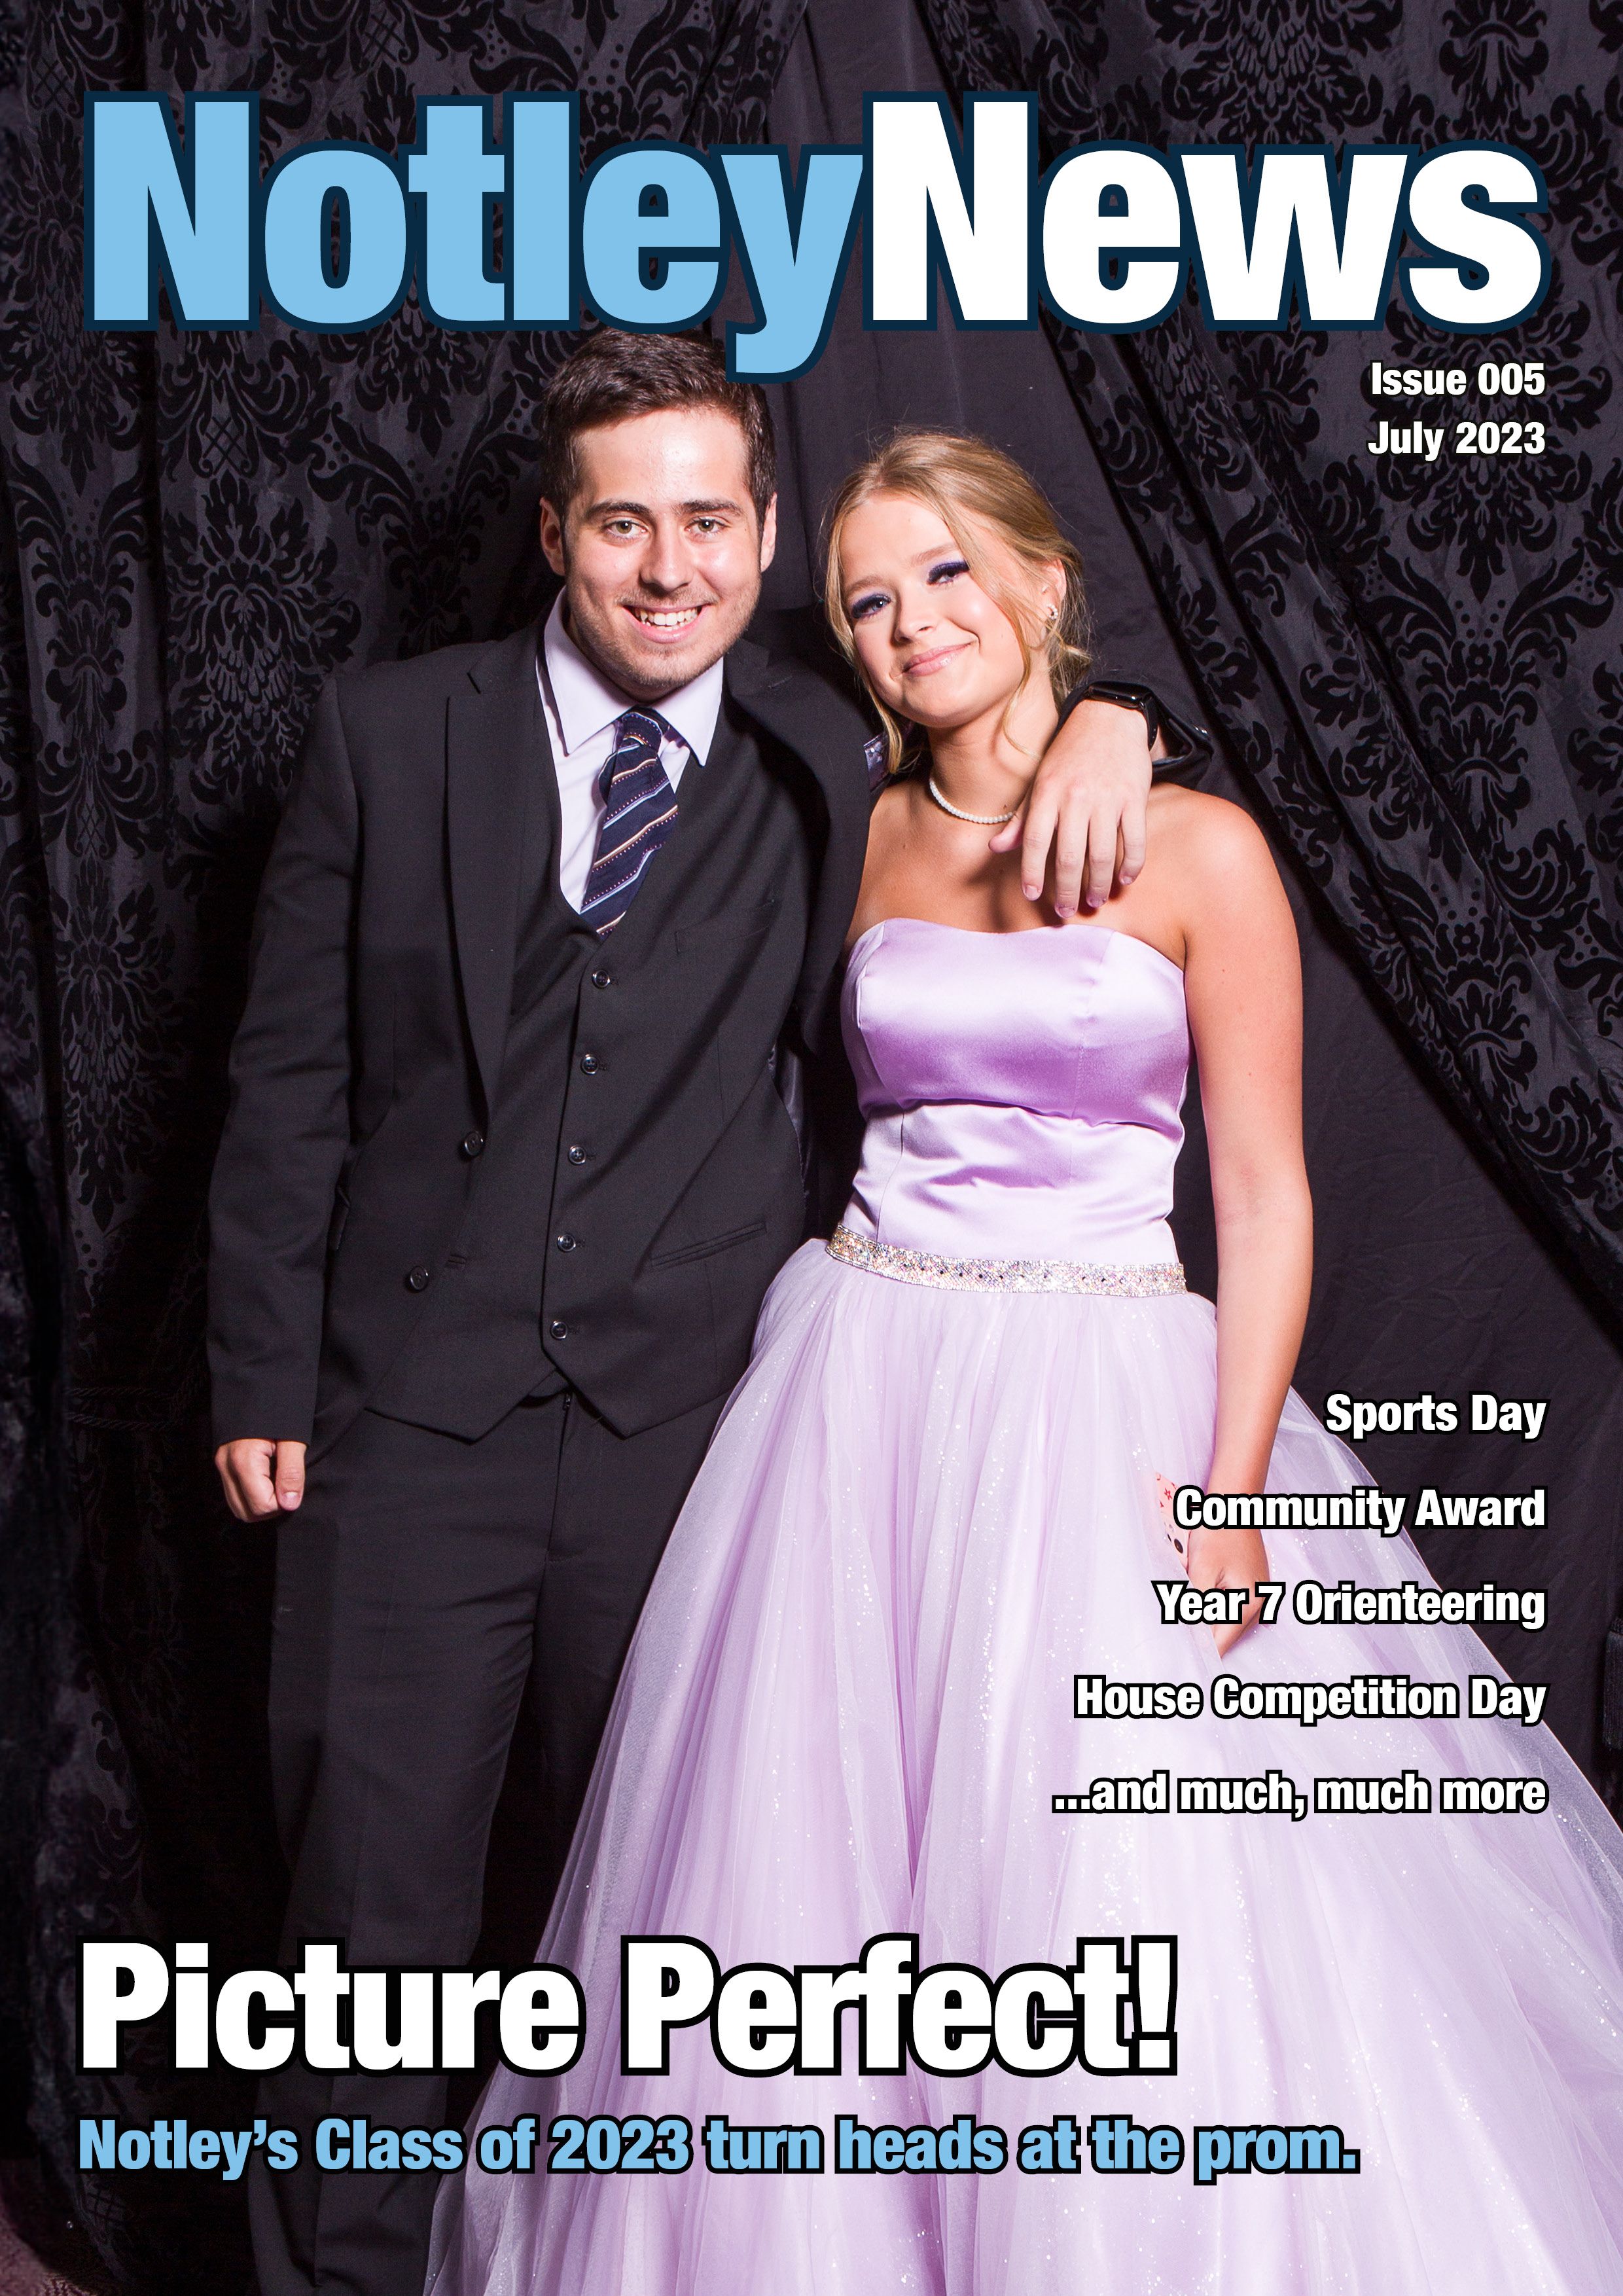 Notley News Issue 005